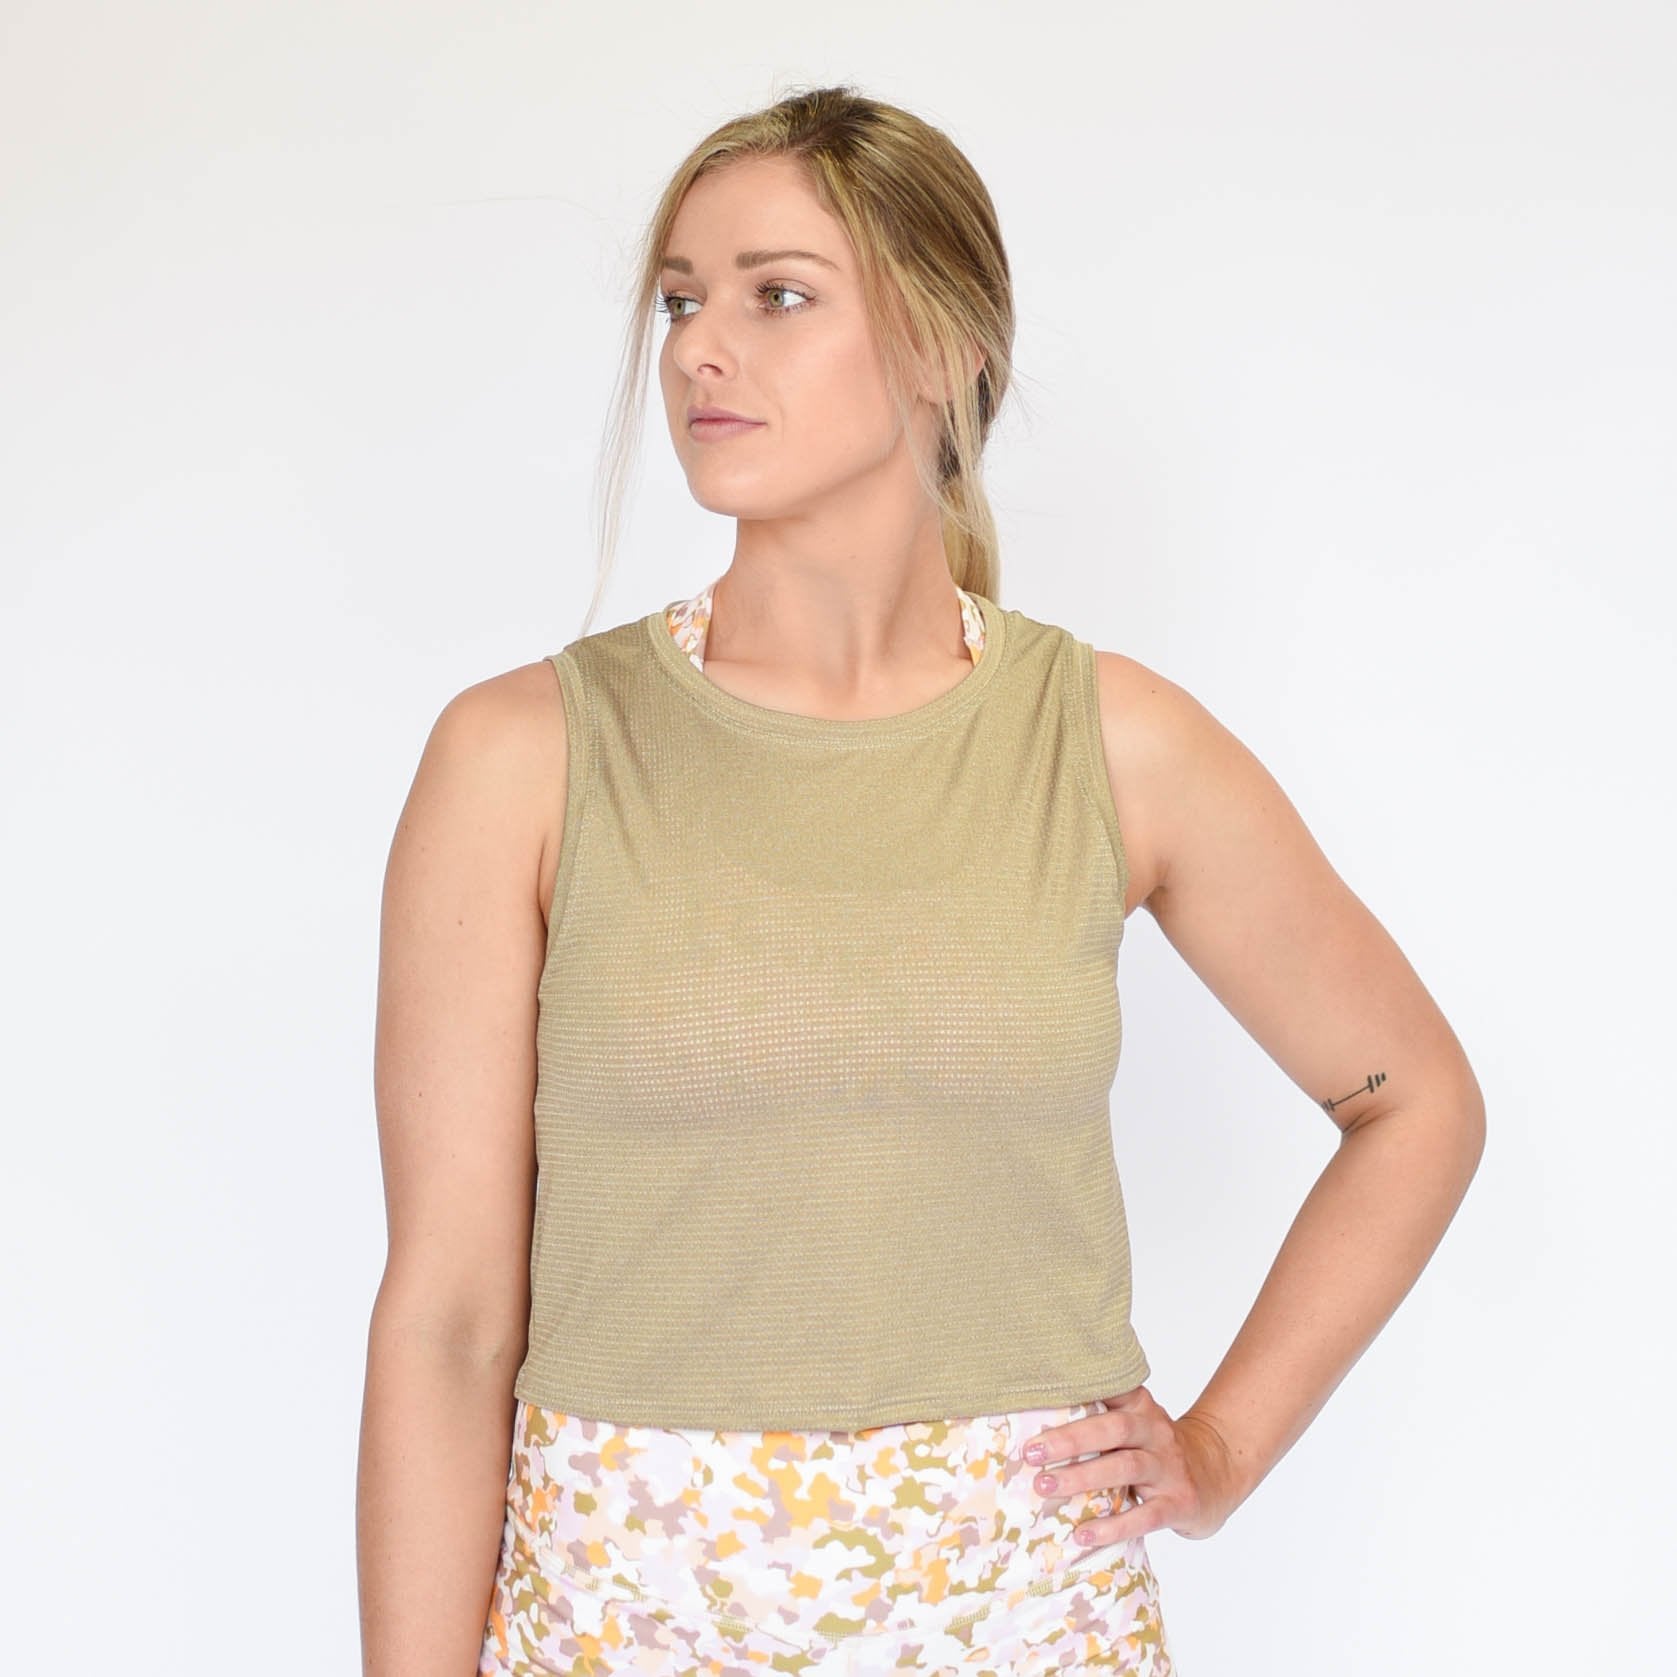 FLEO Dylan Muscle Crop - Mojave - 9 for 9